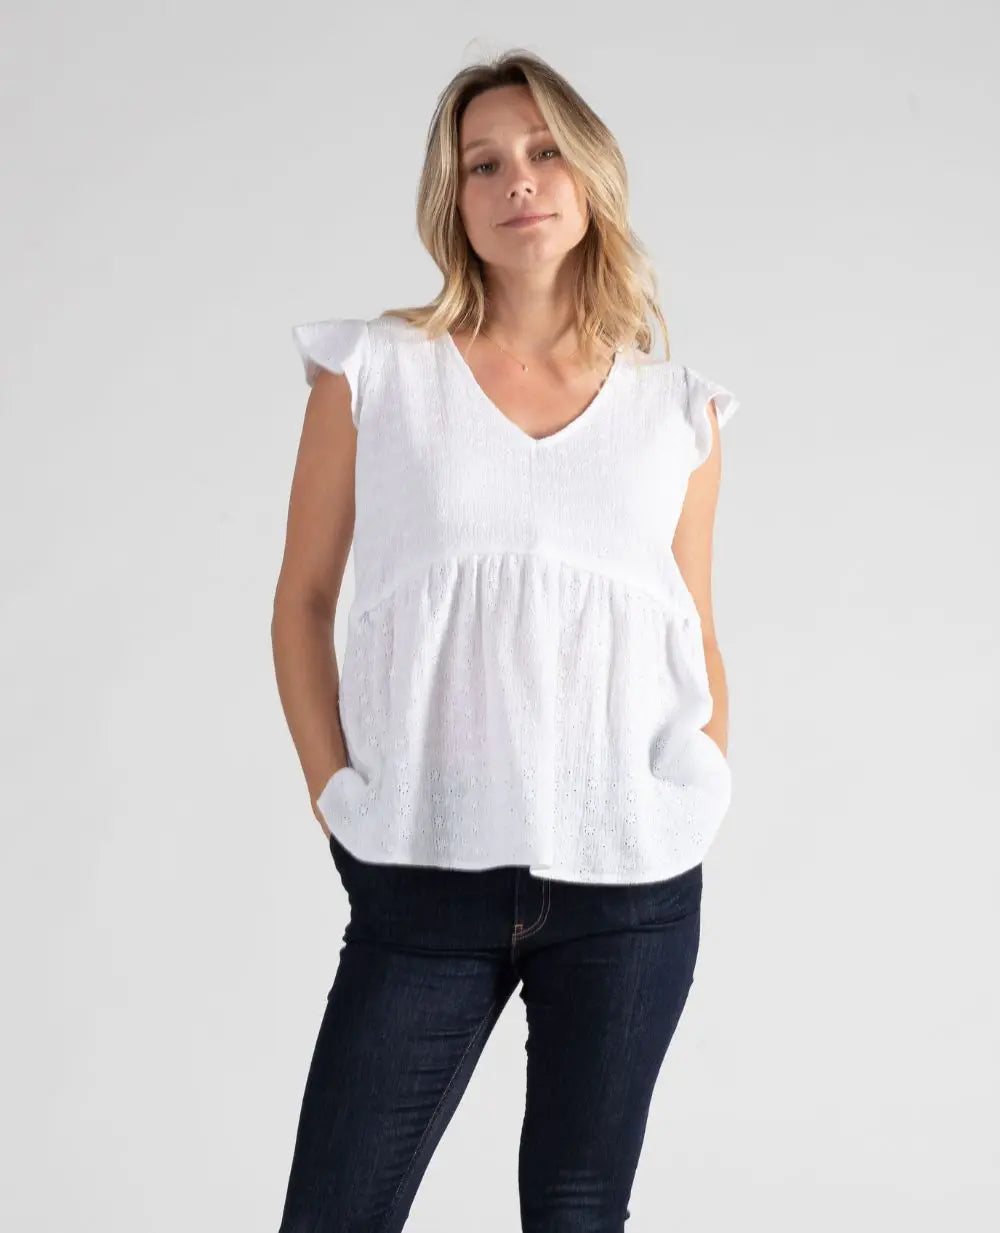 Suzanne white embroidered butterfly top for pregnancy and breastfeeding